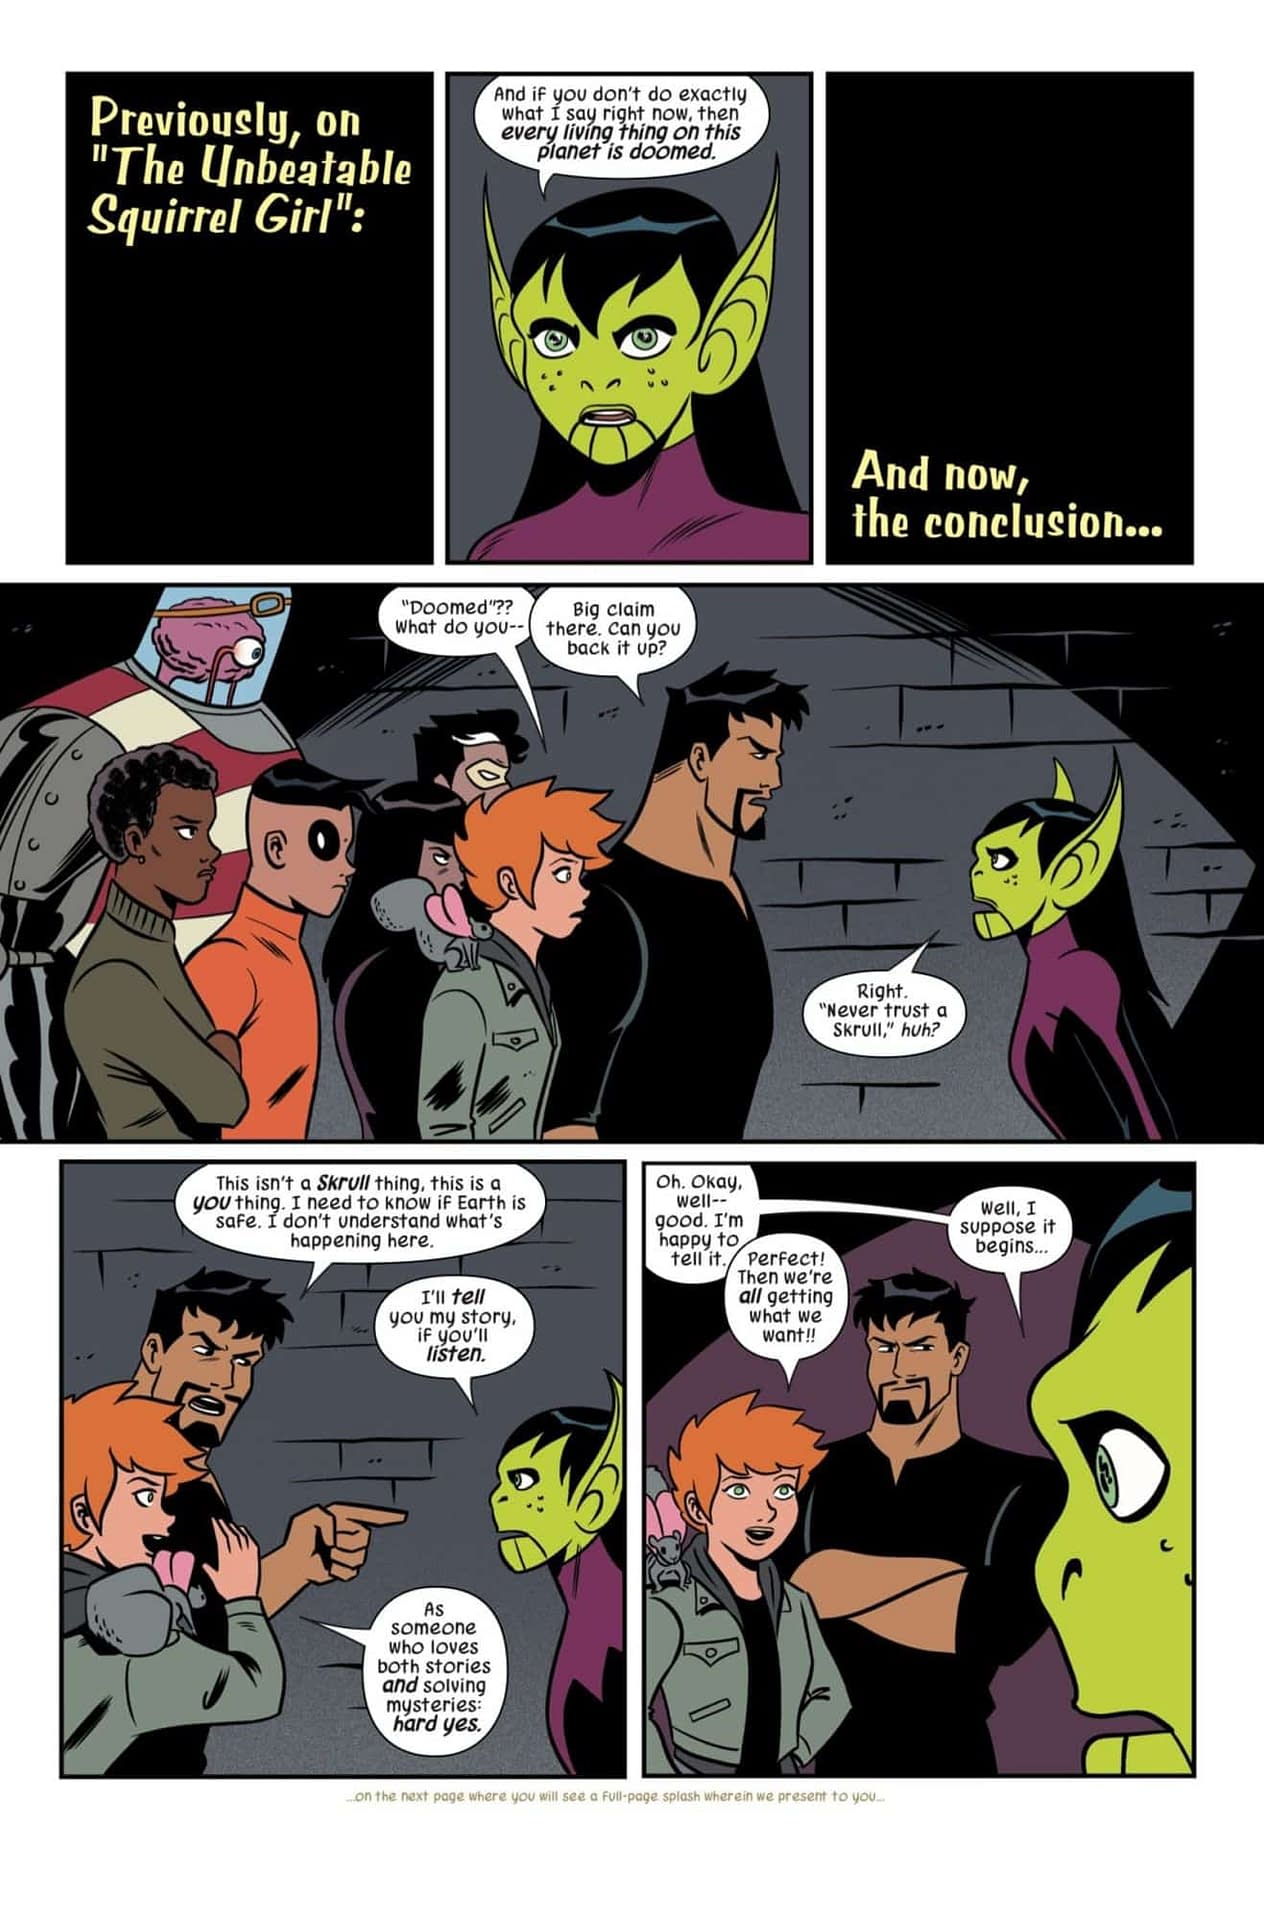 American Values on the Skrull Homeworld in Next Week's Unbeatable Squirrel Girl #40